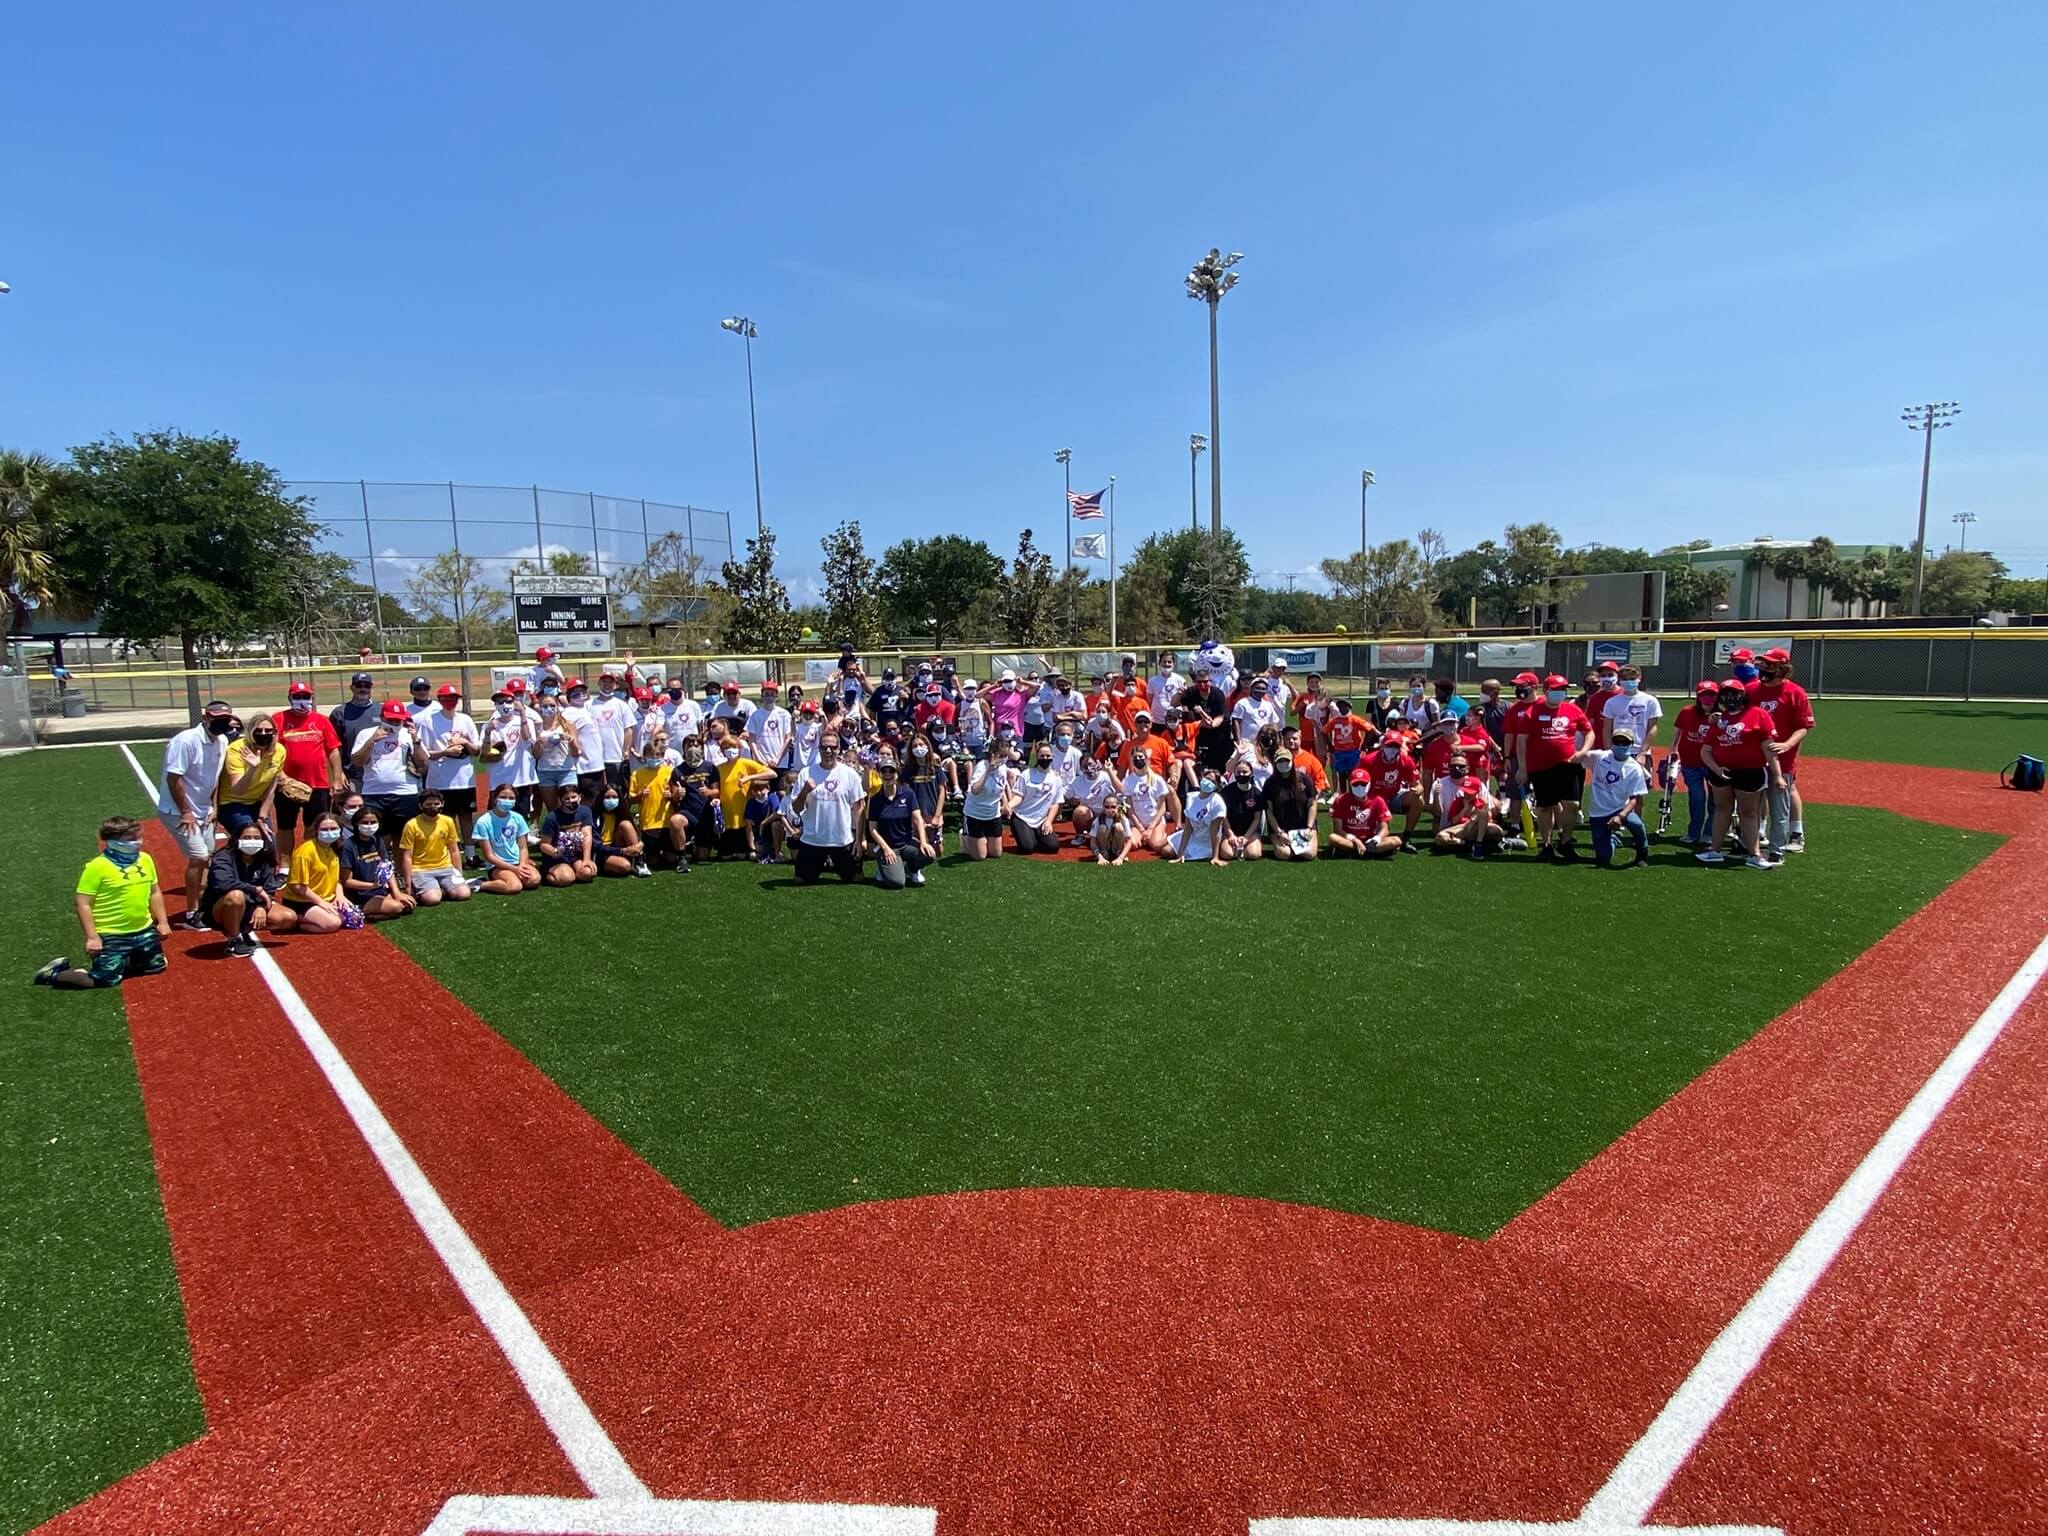 The Miracle League of Palm Beach County